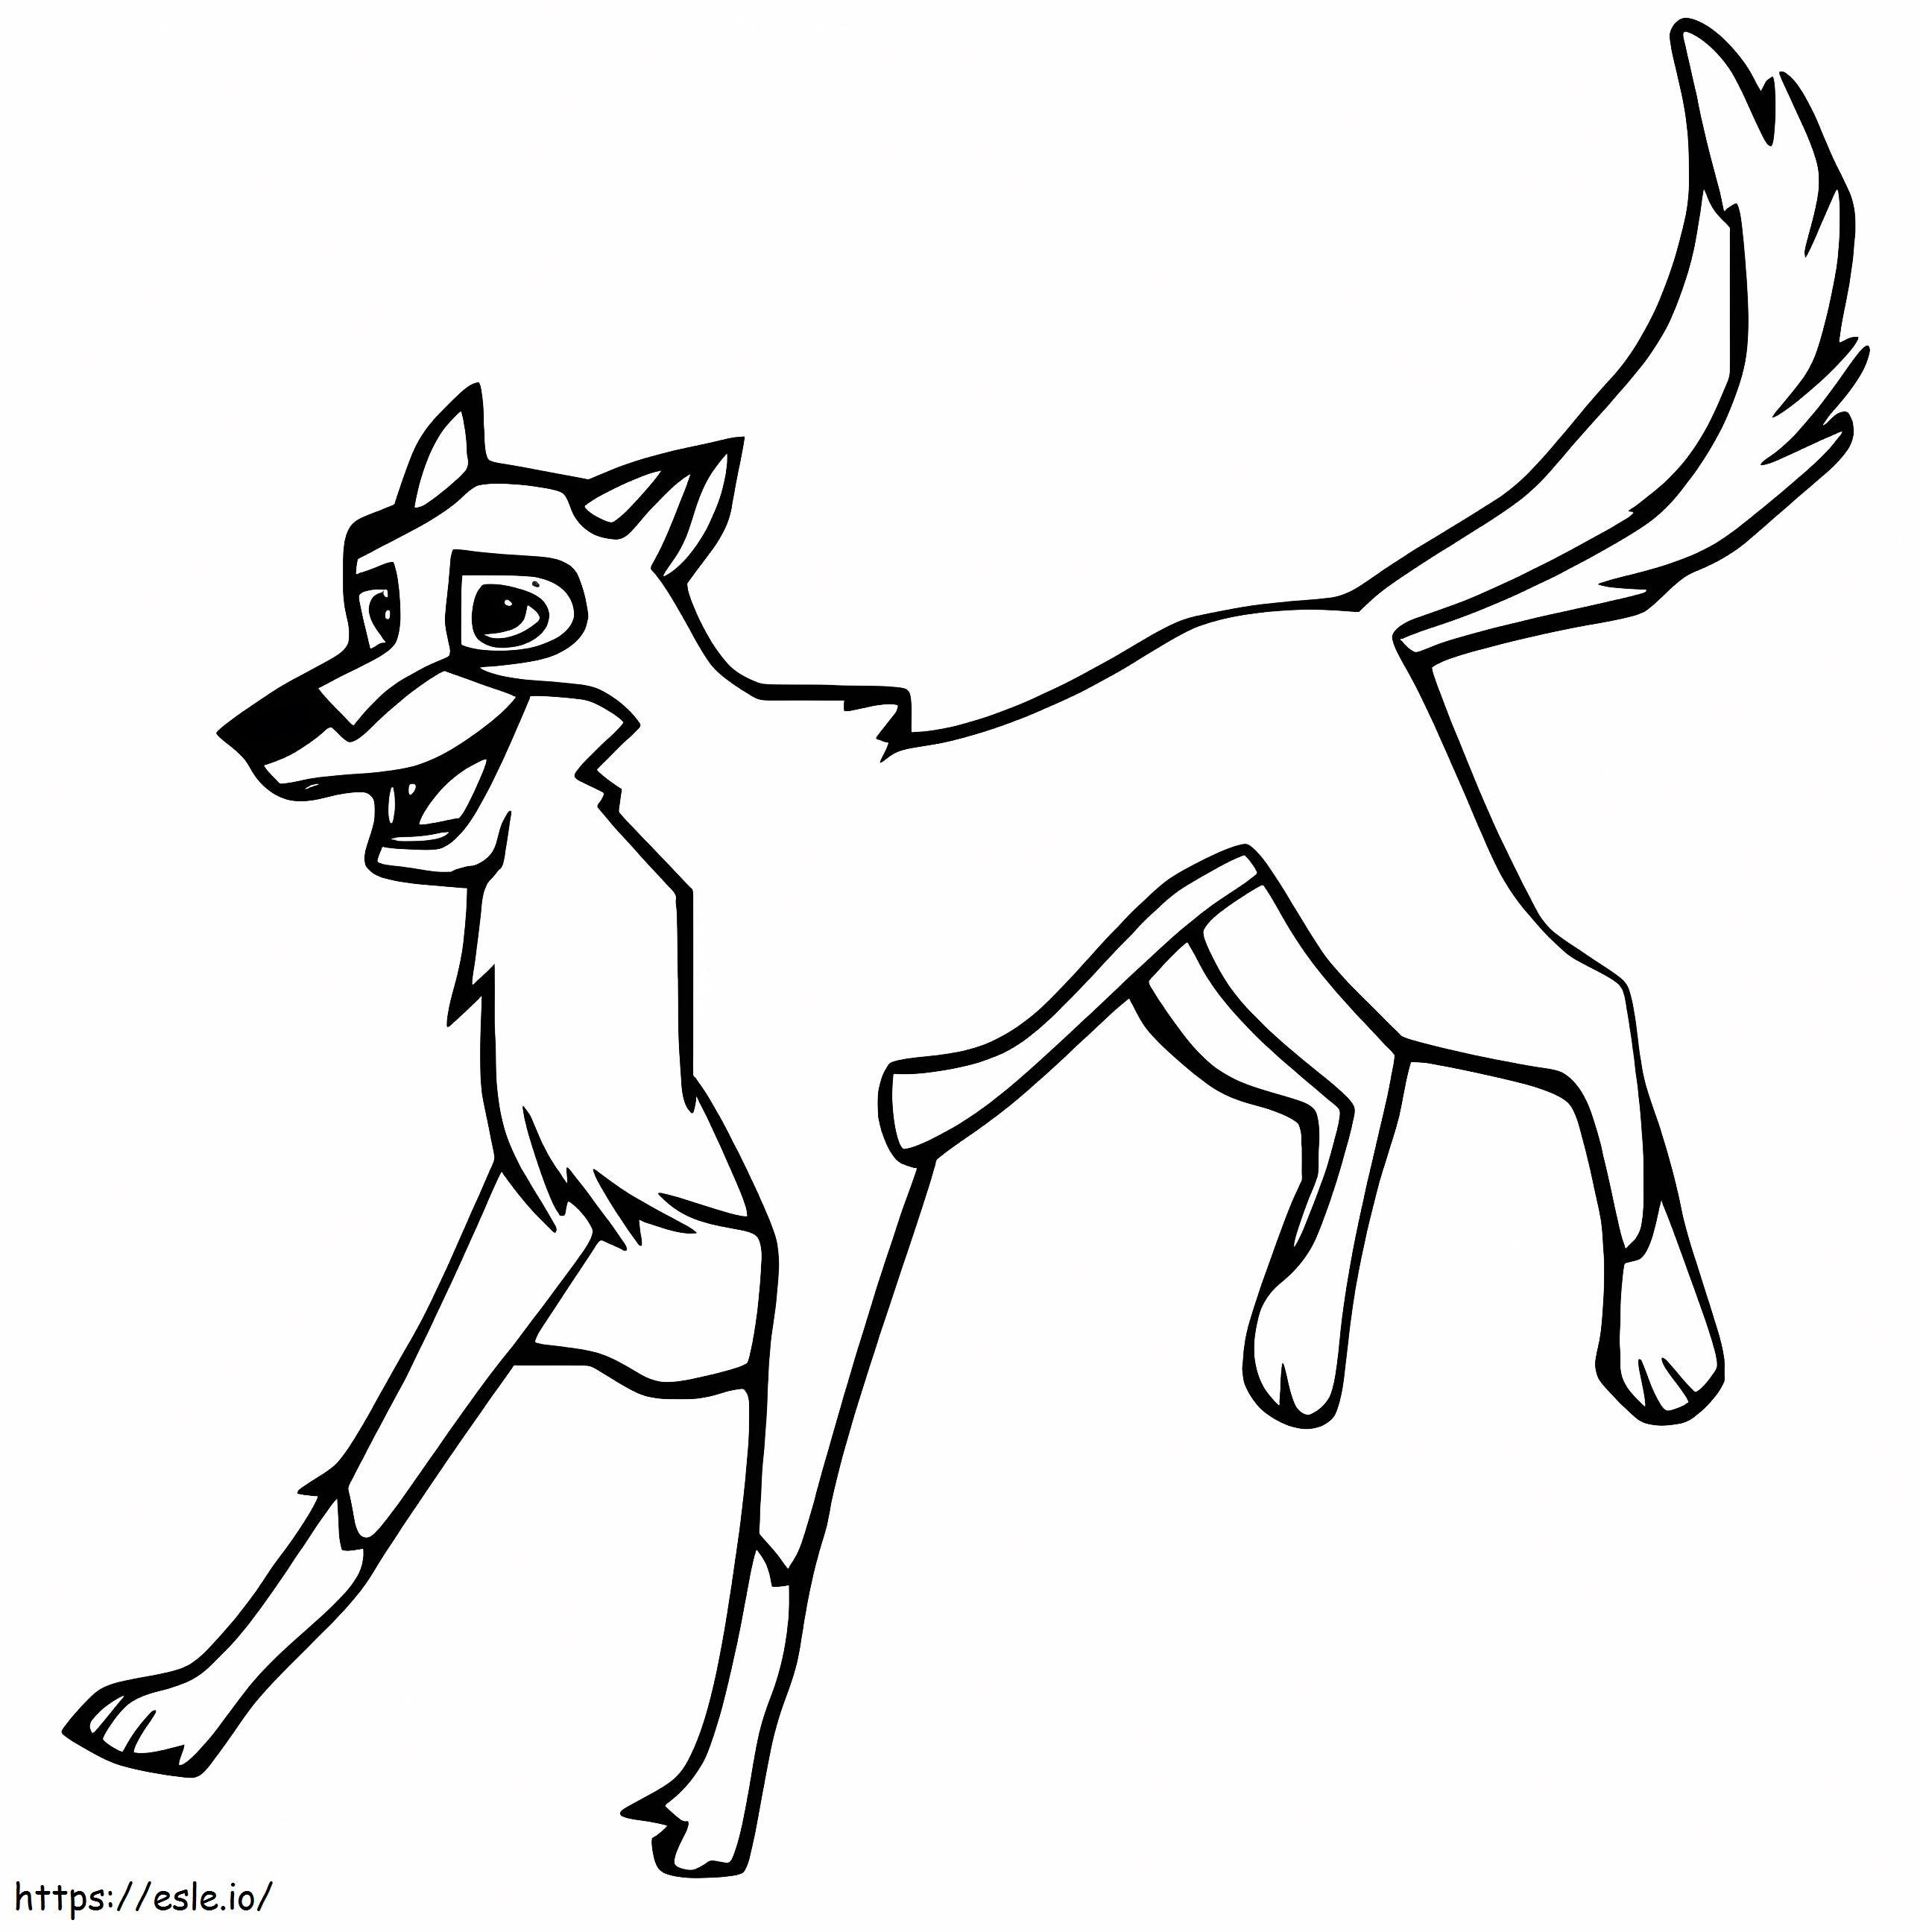 Steele The Sled Dog coloring page